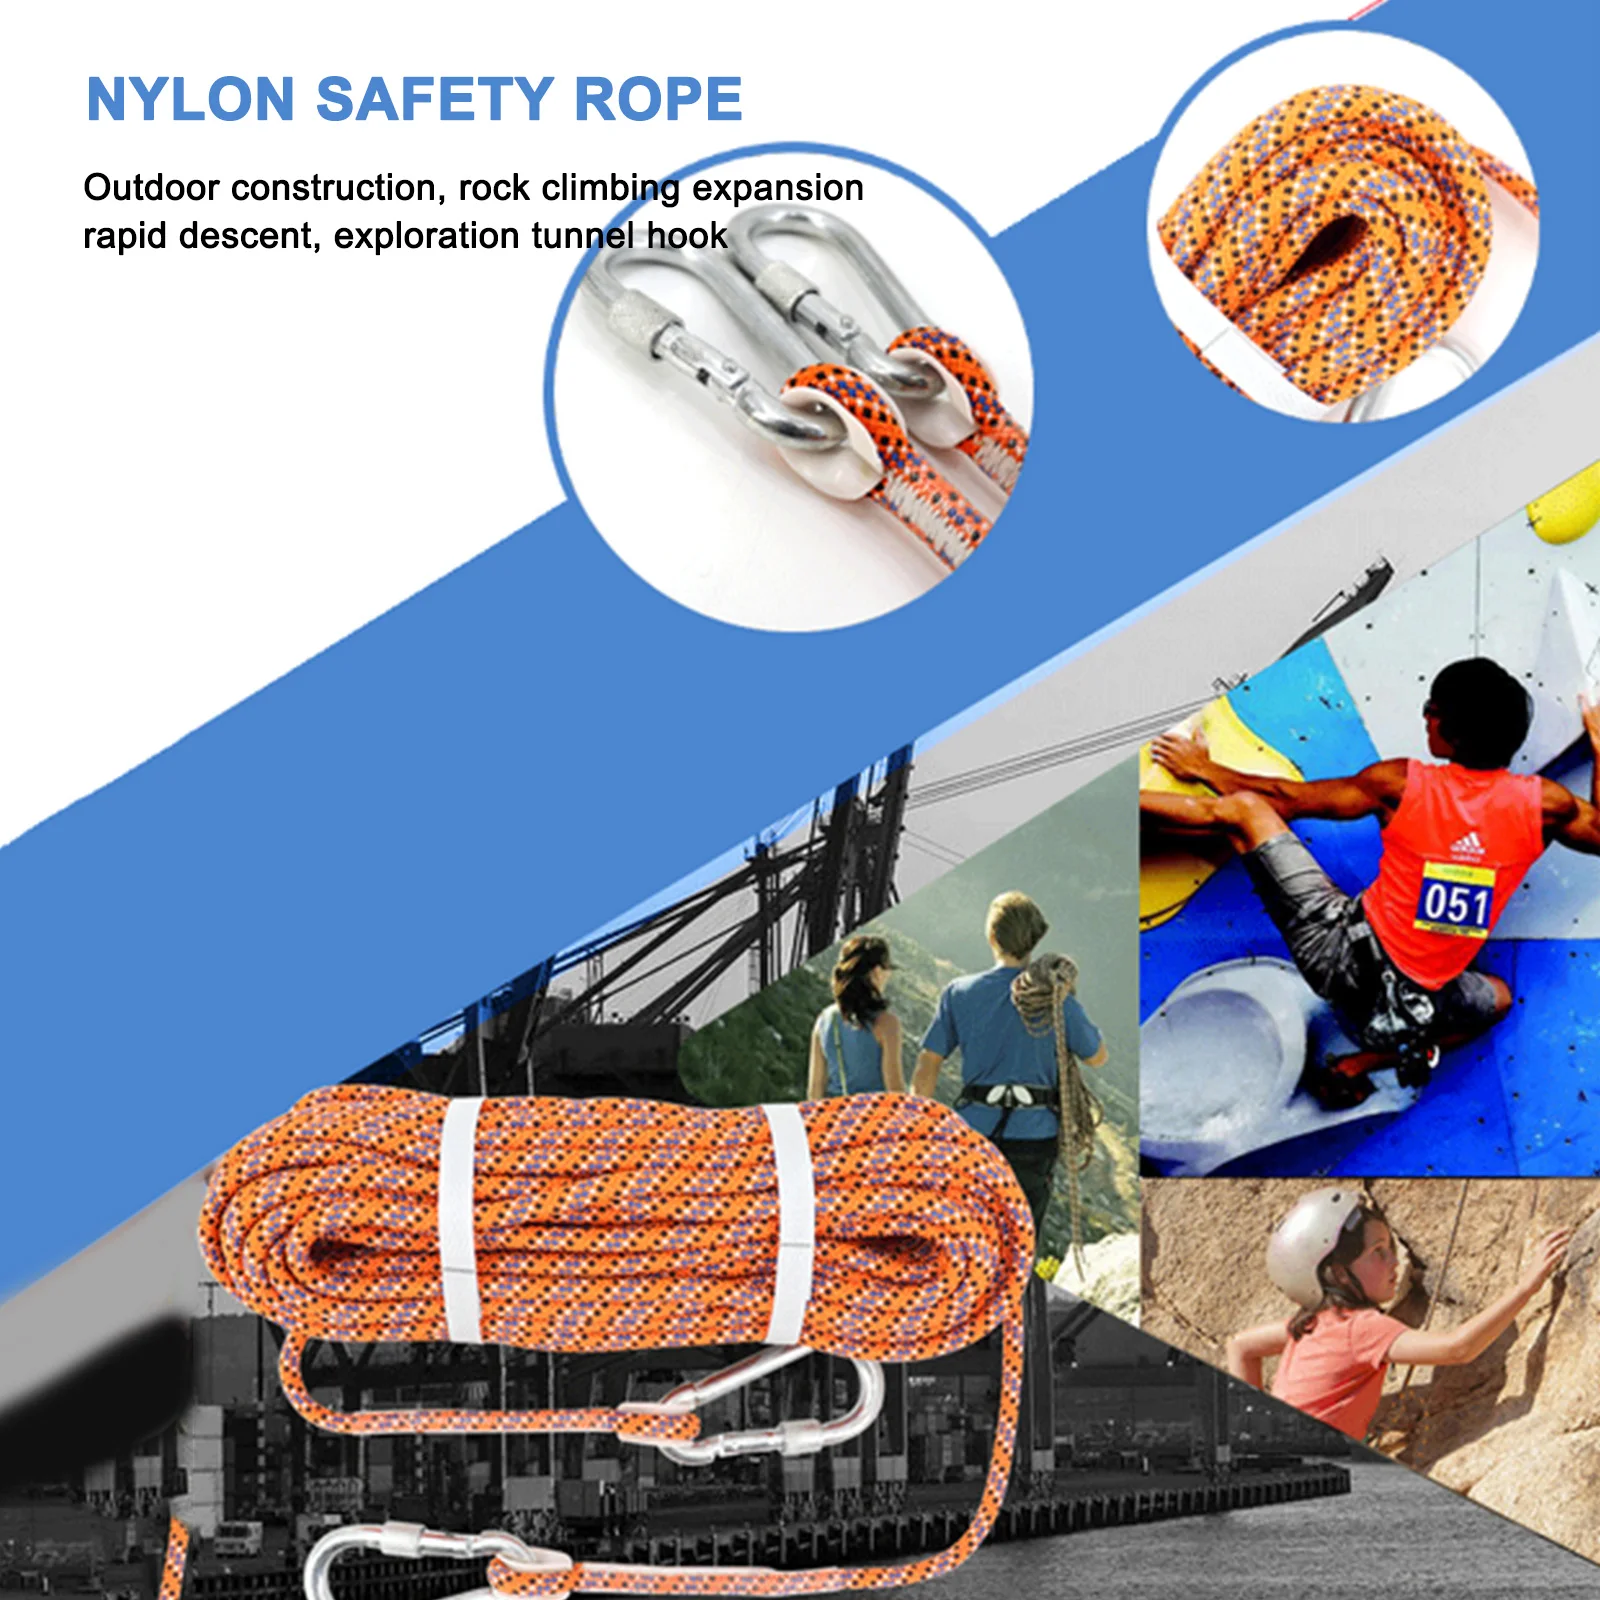 

10m 20m 8mm Diameter High Strength Cord Safety Rock Climbing Rope Hiking Accessories Camping Equipment Survival Escape Tools